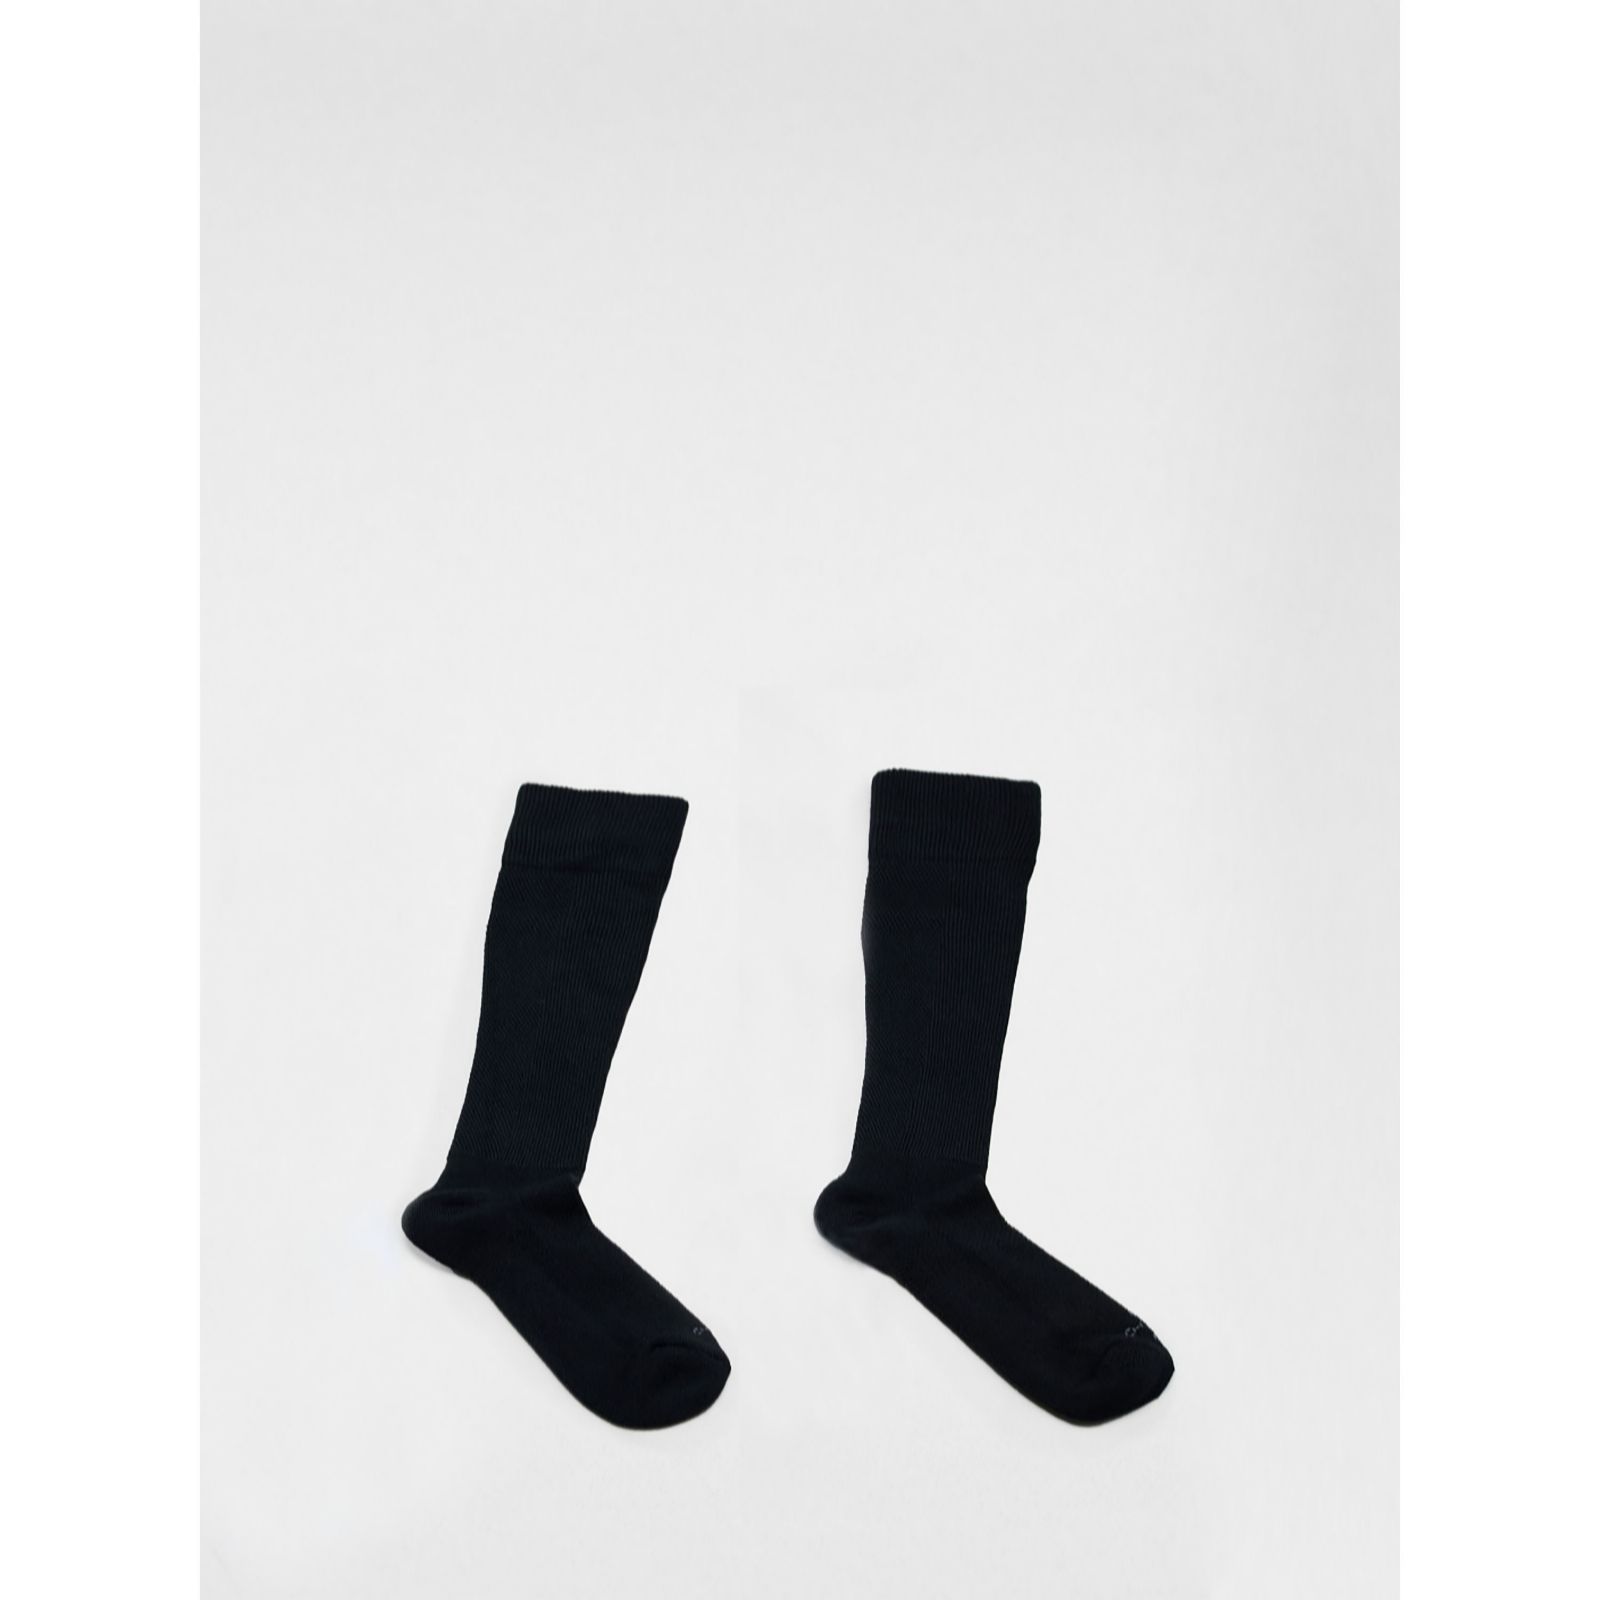 Tommie Copper Over-the-Calf Compression Socks - QVC UK